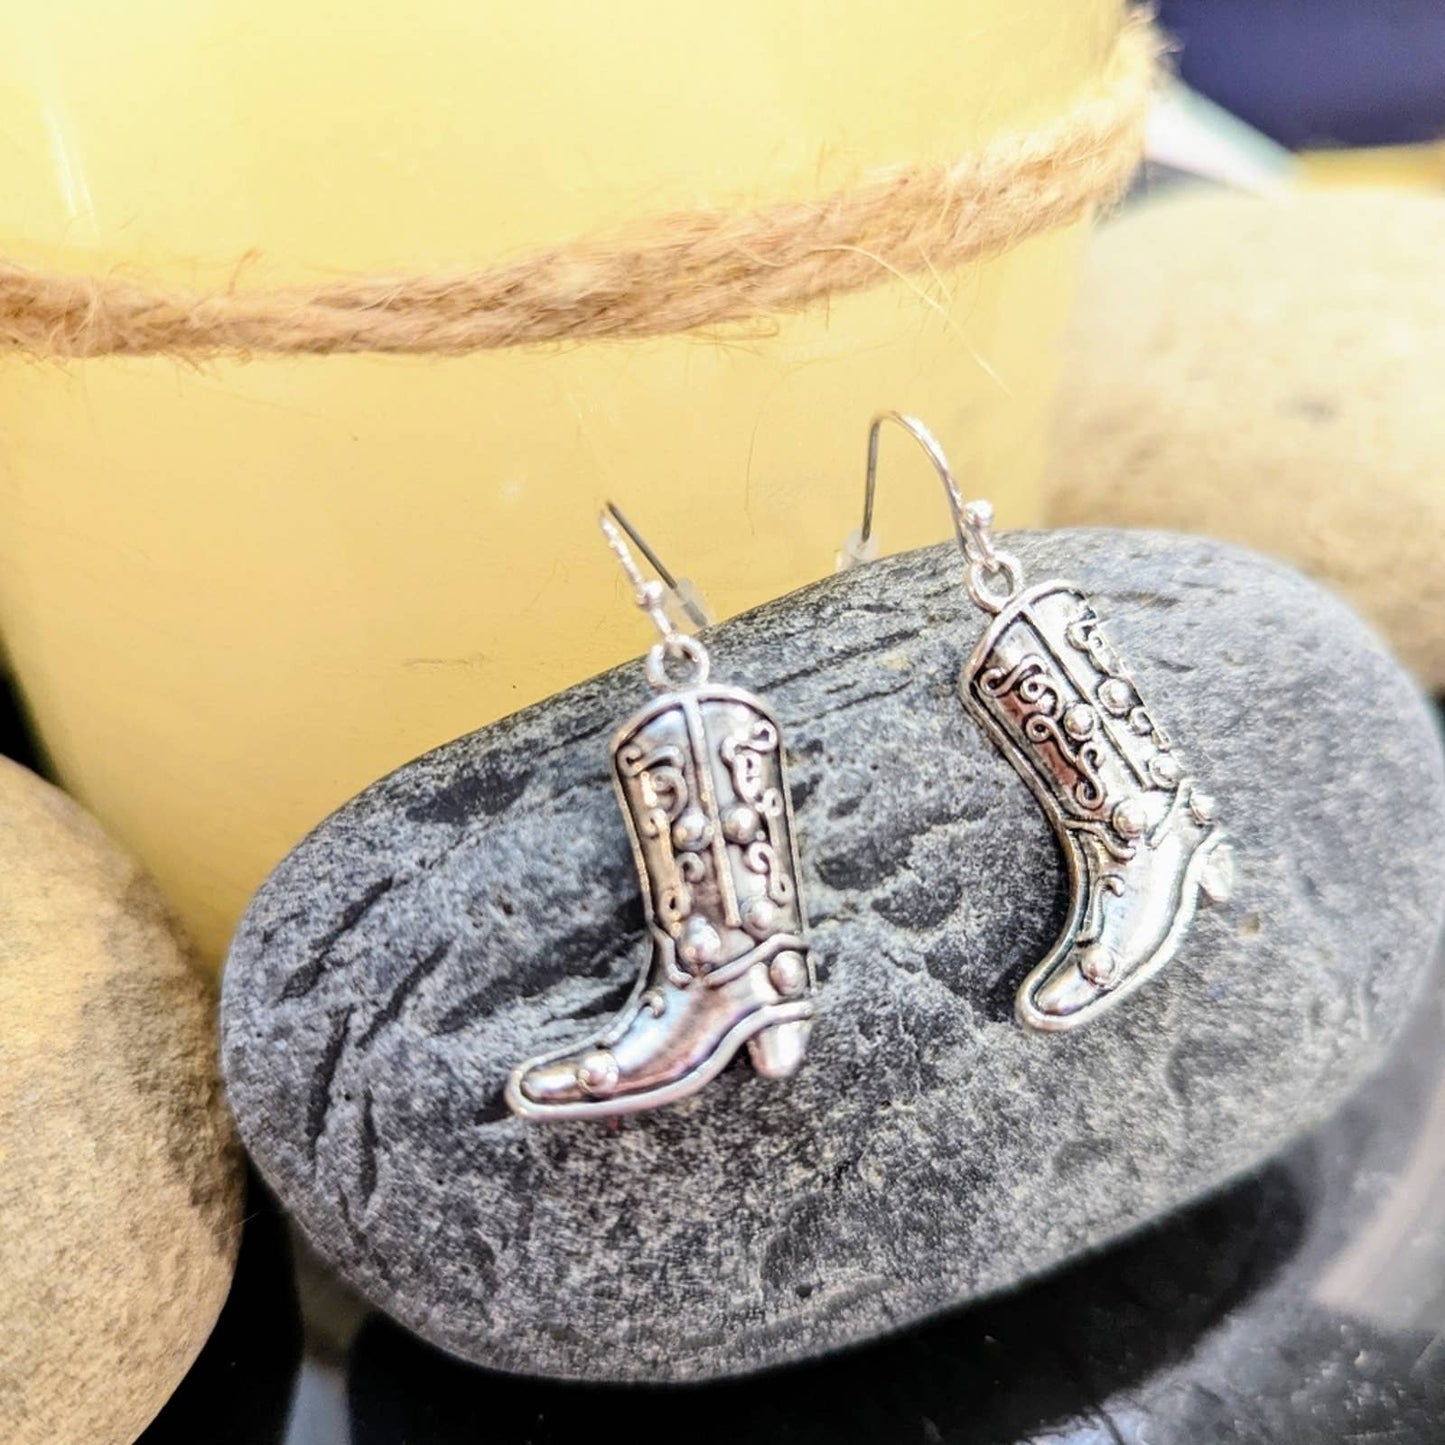 Silver Western Cowgirl Cowboy Boot Hook Earrings with a Distressed Look